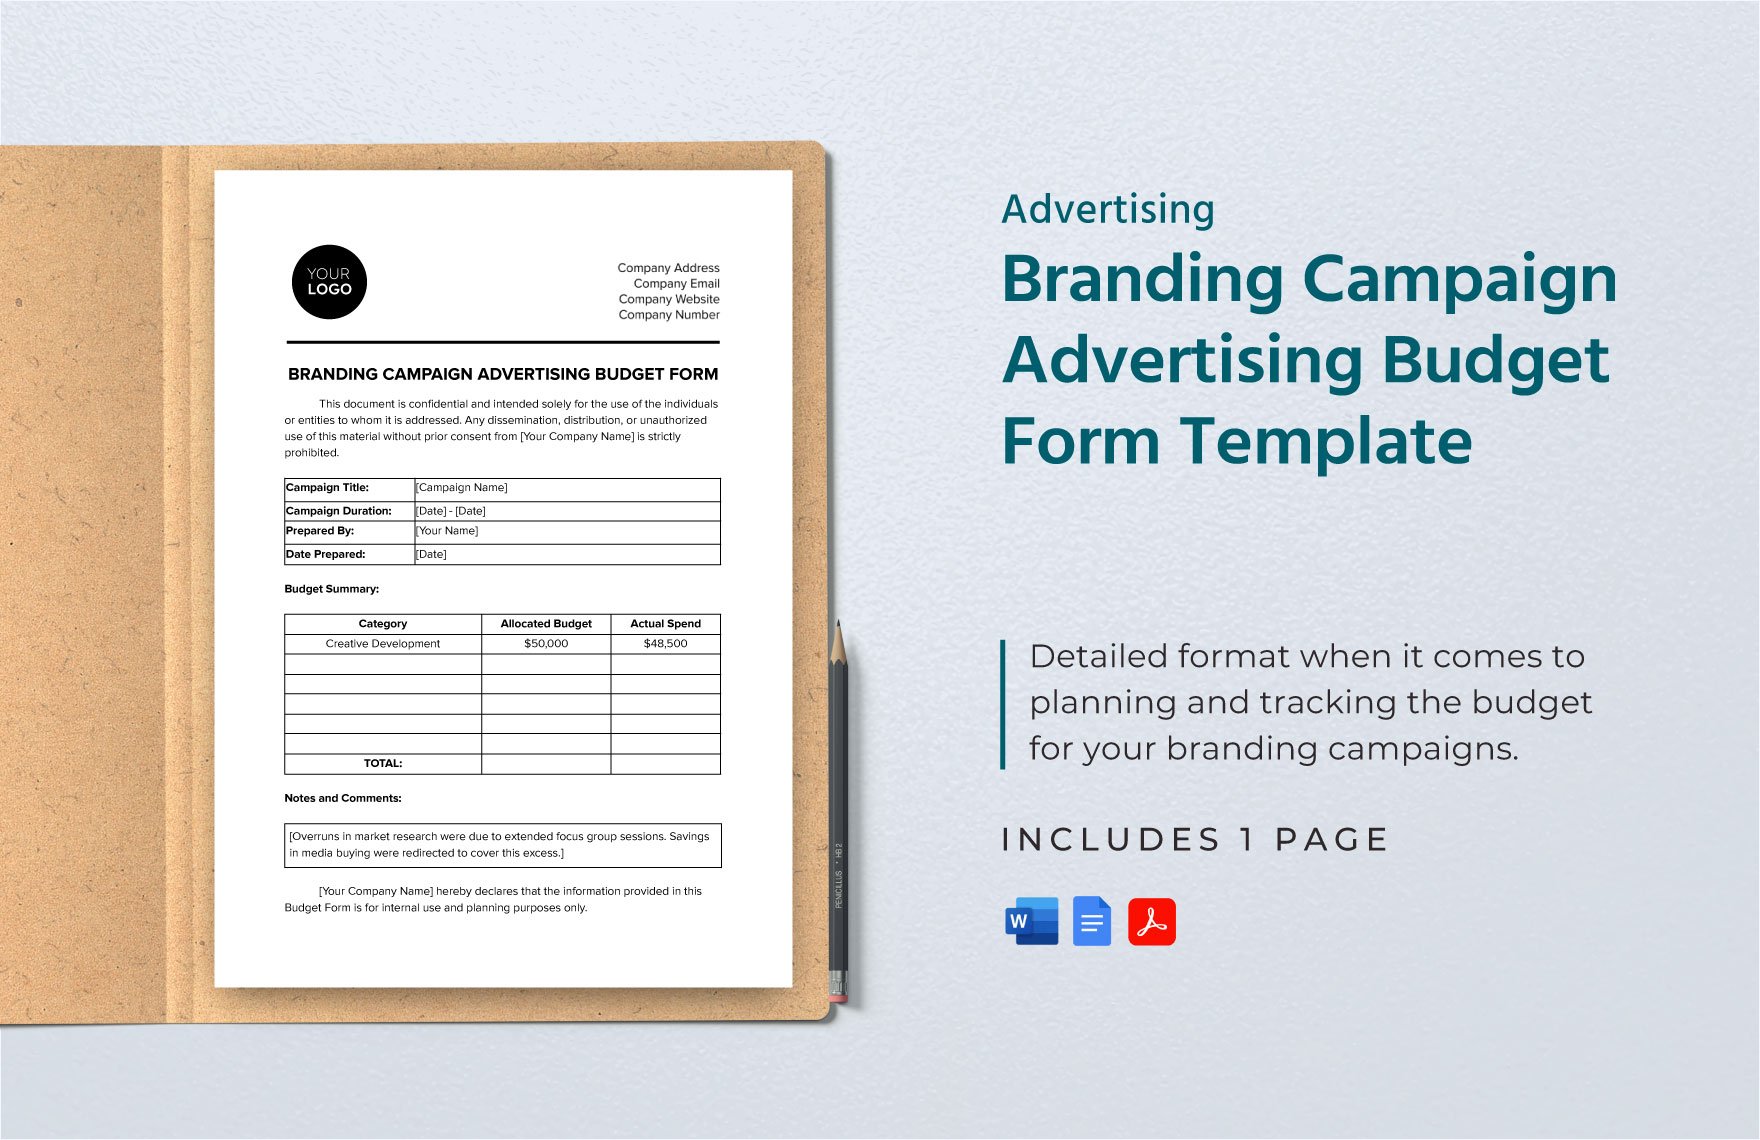 Branding Campaign Advertising Budget Form Template in Word, Google Docs, PDF